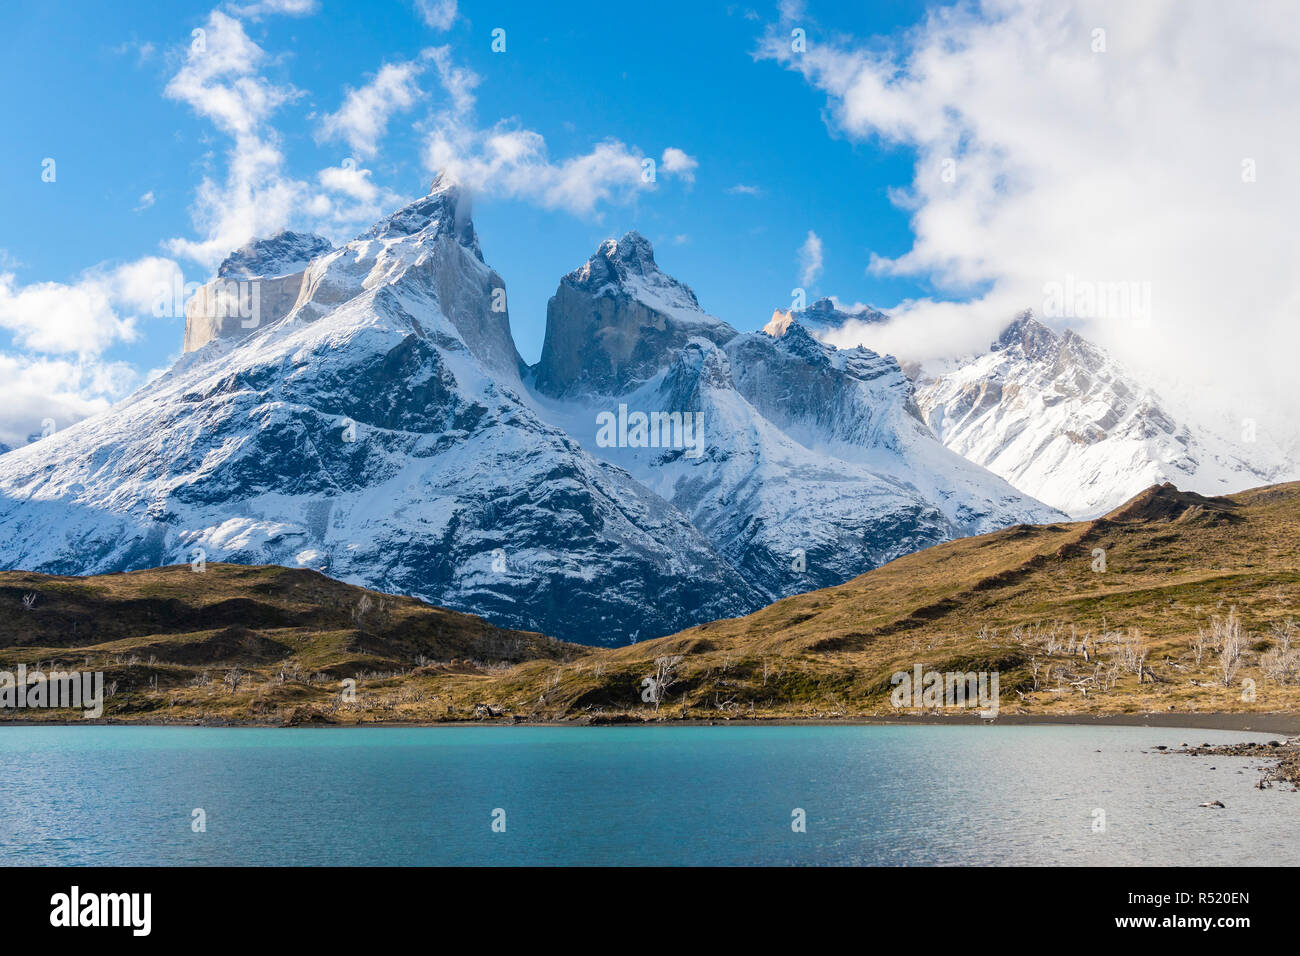 Cuernos del Paine mountains in Torres del Paine National Park in Chile Stock Photo